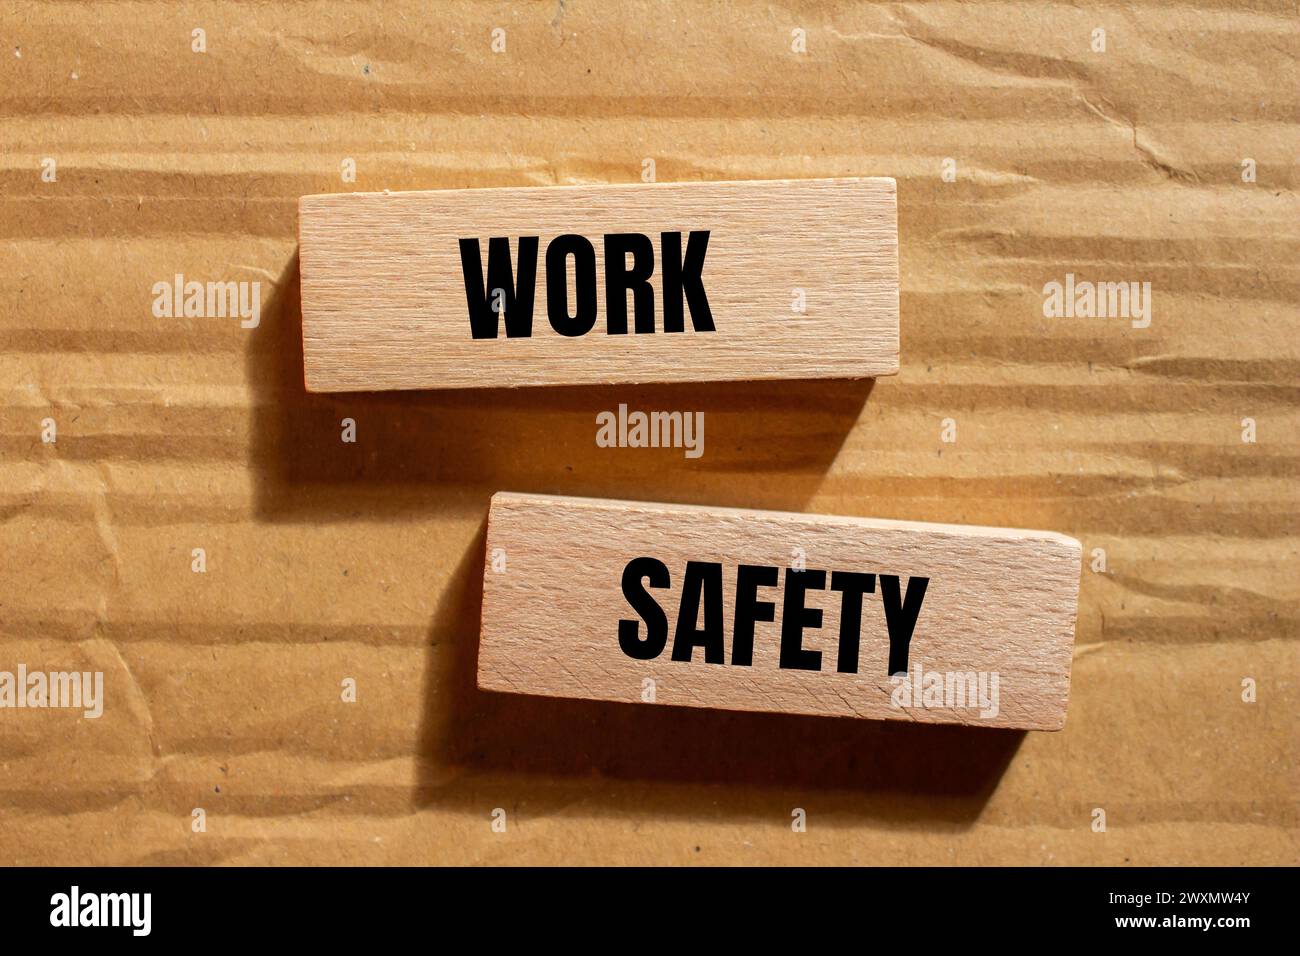 Work safety words written on wooden blocks with cardboard background. Conceptual business symbol. Copy space. Stock Photo